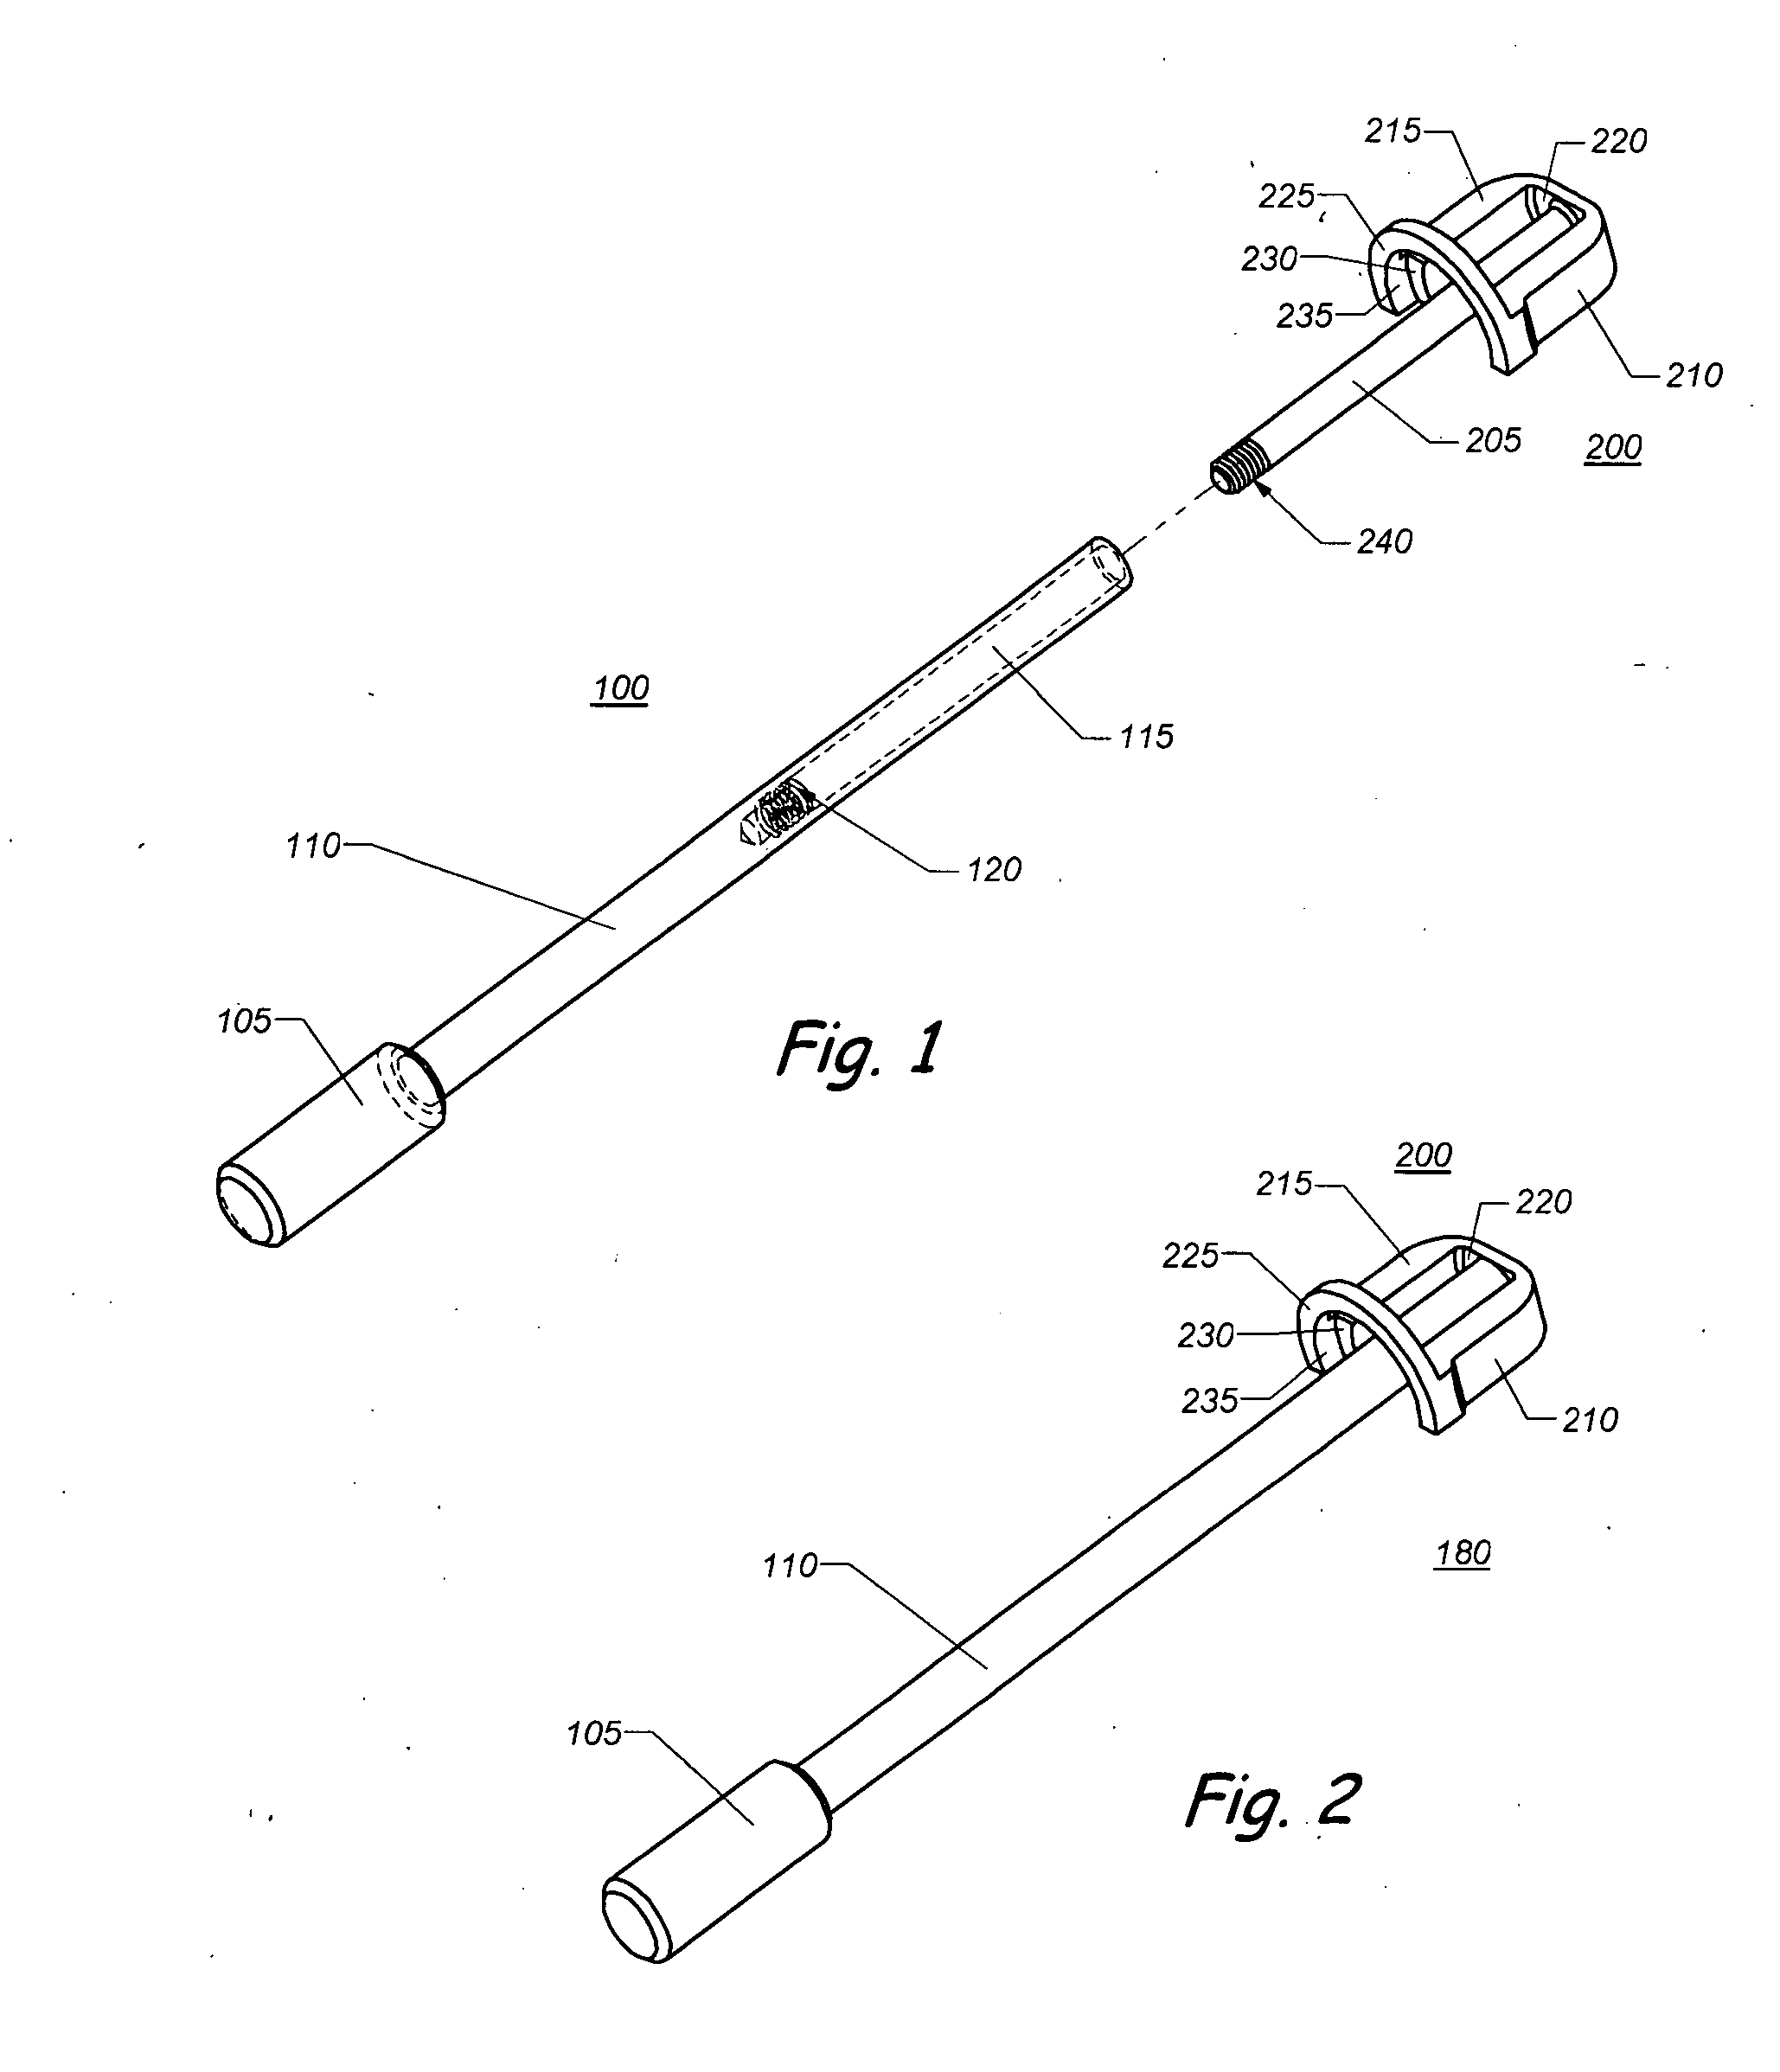 Apparatus and method of shaping an intervertebral space